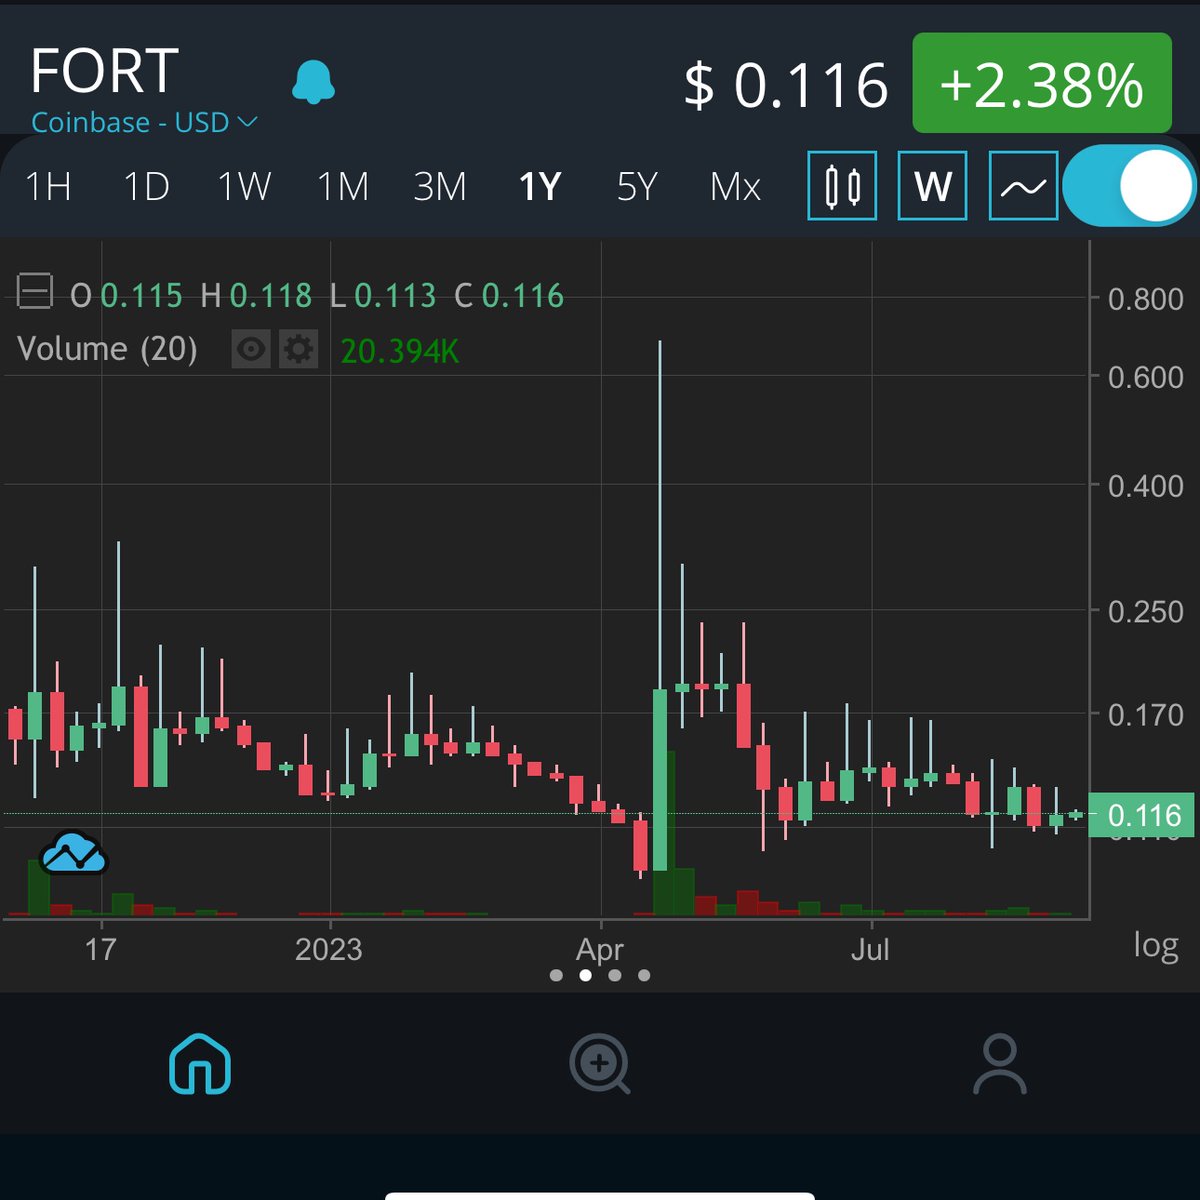 $fort #fort 
Will pump hard very soon 
Great consolidation above .1
It was just .60 4-5 months ago 

$btc $eth $mco2 $shib